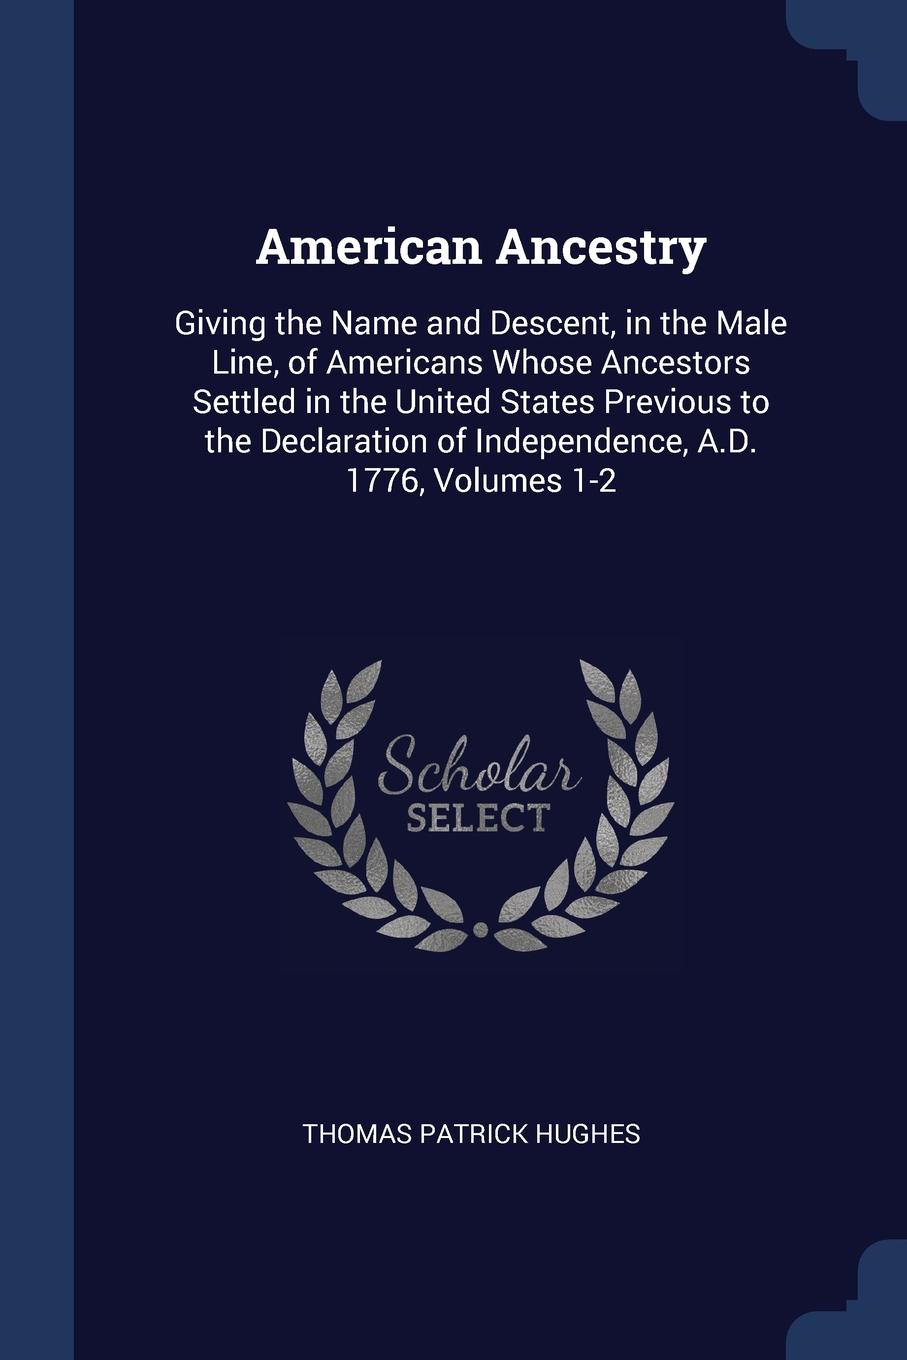 American Ancestry. Giving the Name and Descent, in the Male Line, of Americans Whose Ancestors Settled in the United States Previous to the Declaration of Independence, A.D. 1776, Volumes 1-2